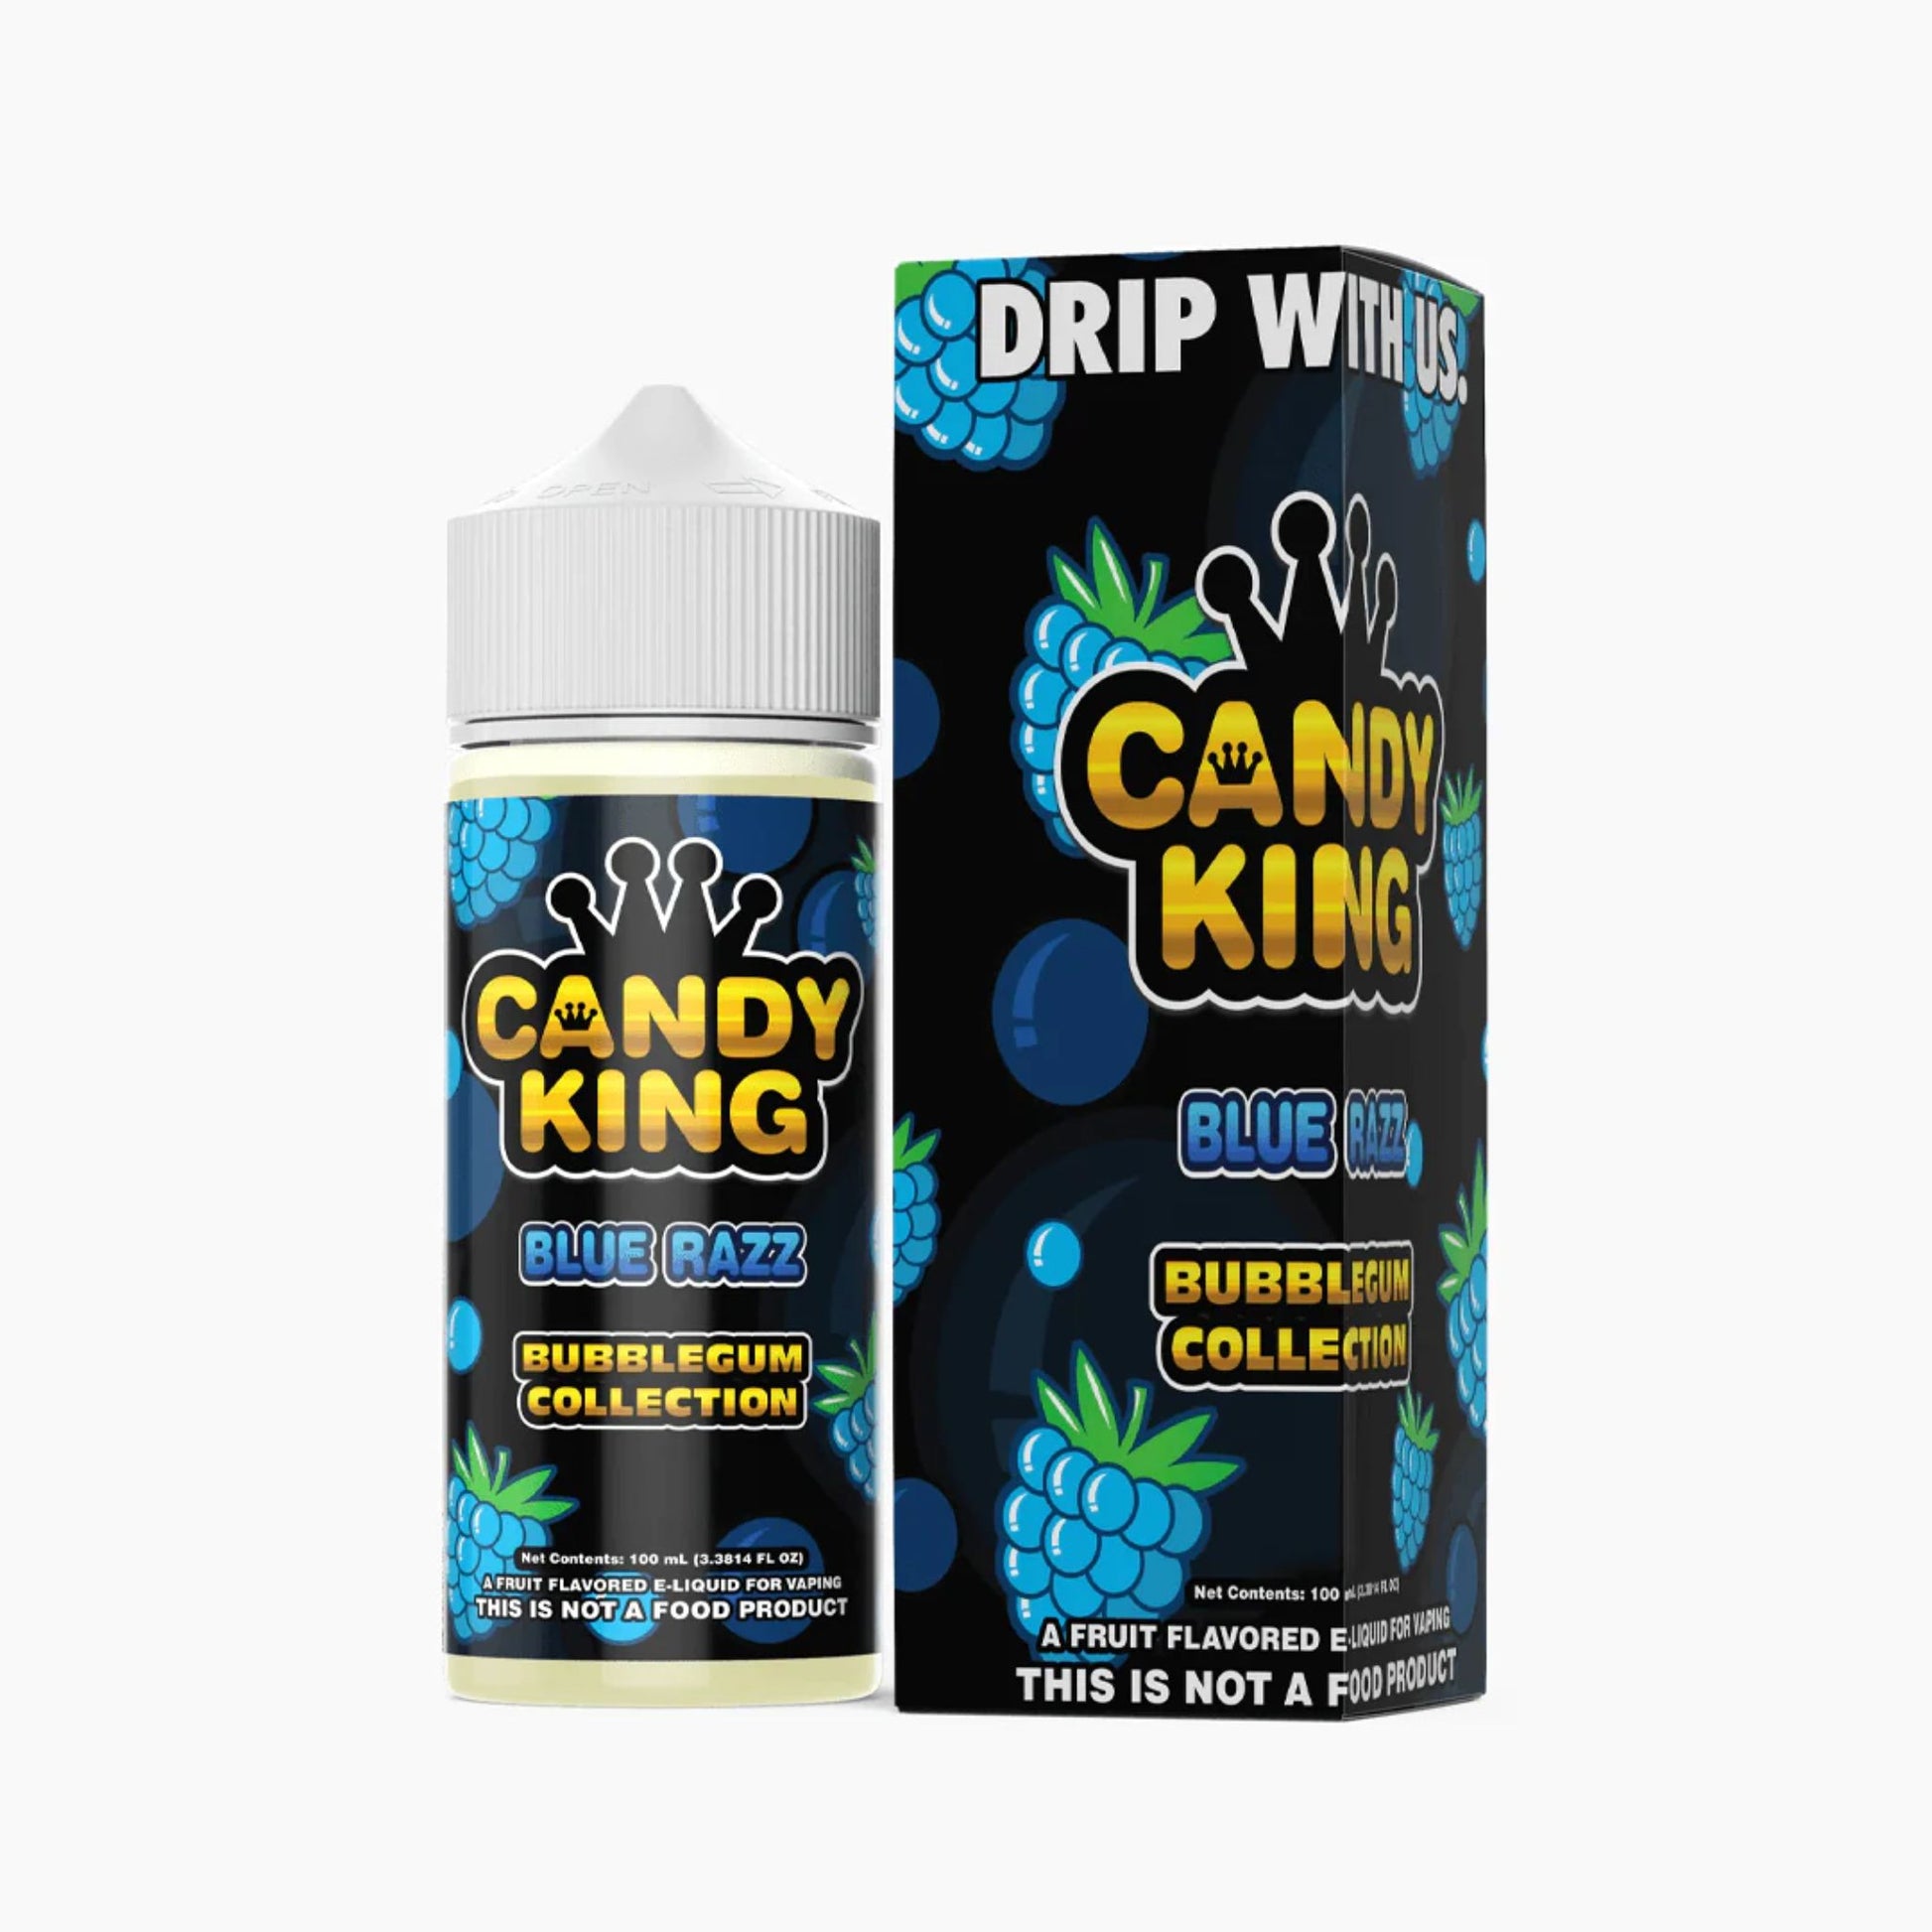 Candy King Bubblegum Collection | Blue Razz | 100ml bottle and box